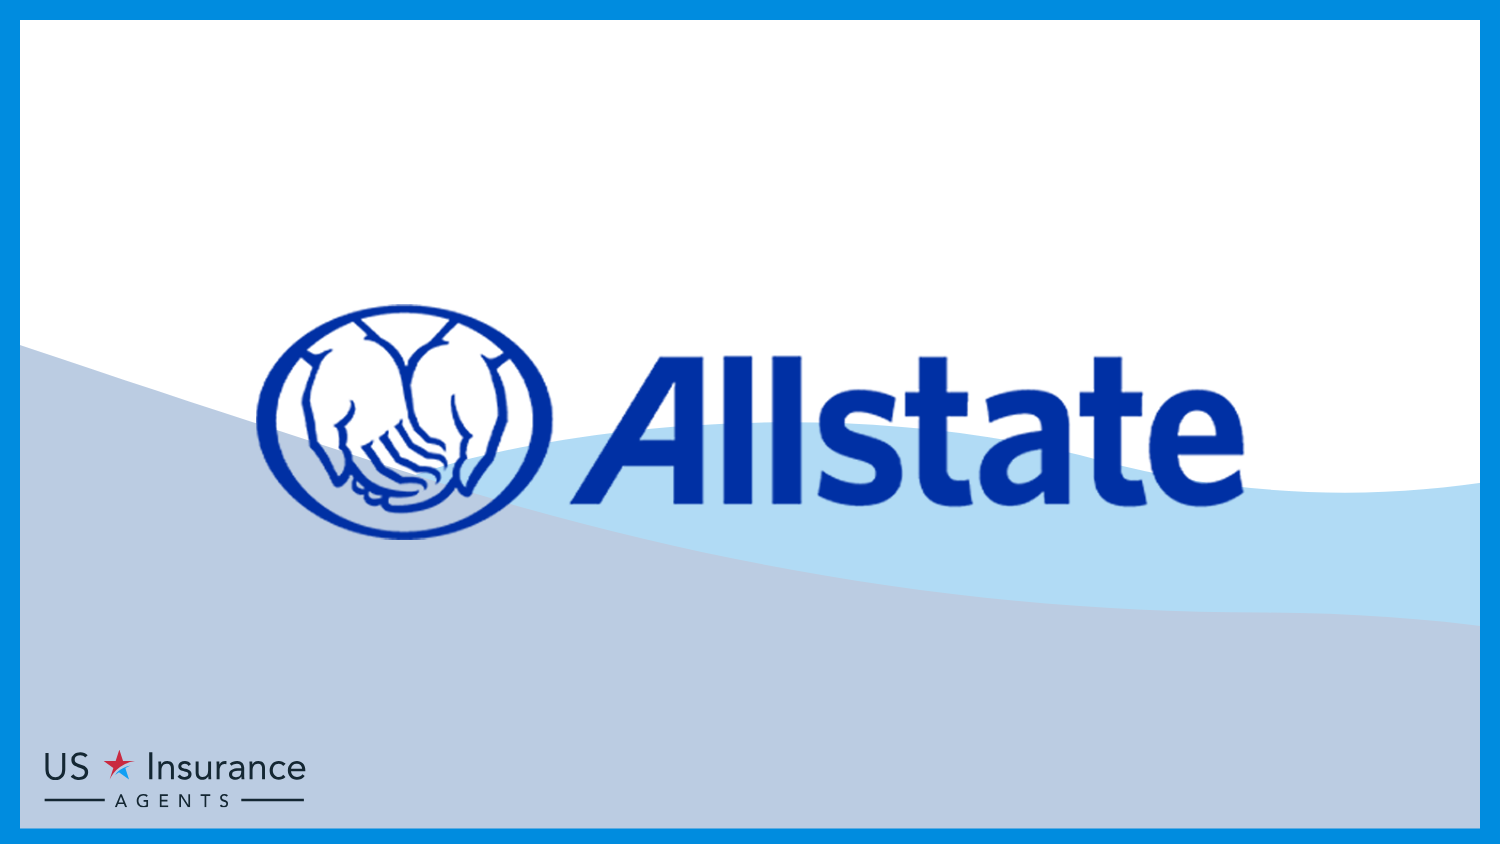 Allstate: Best Business Insurance for Pressure Washing Businesses